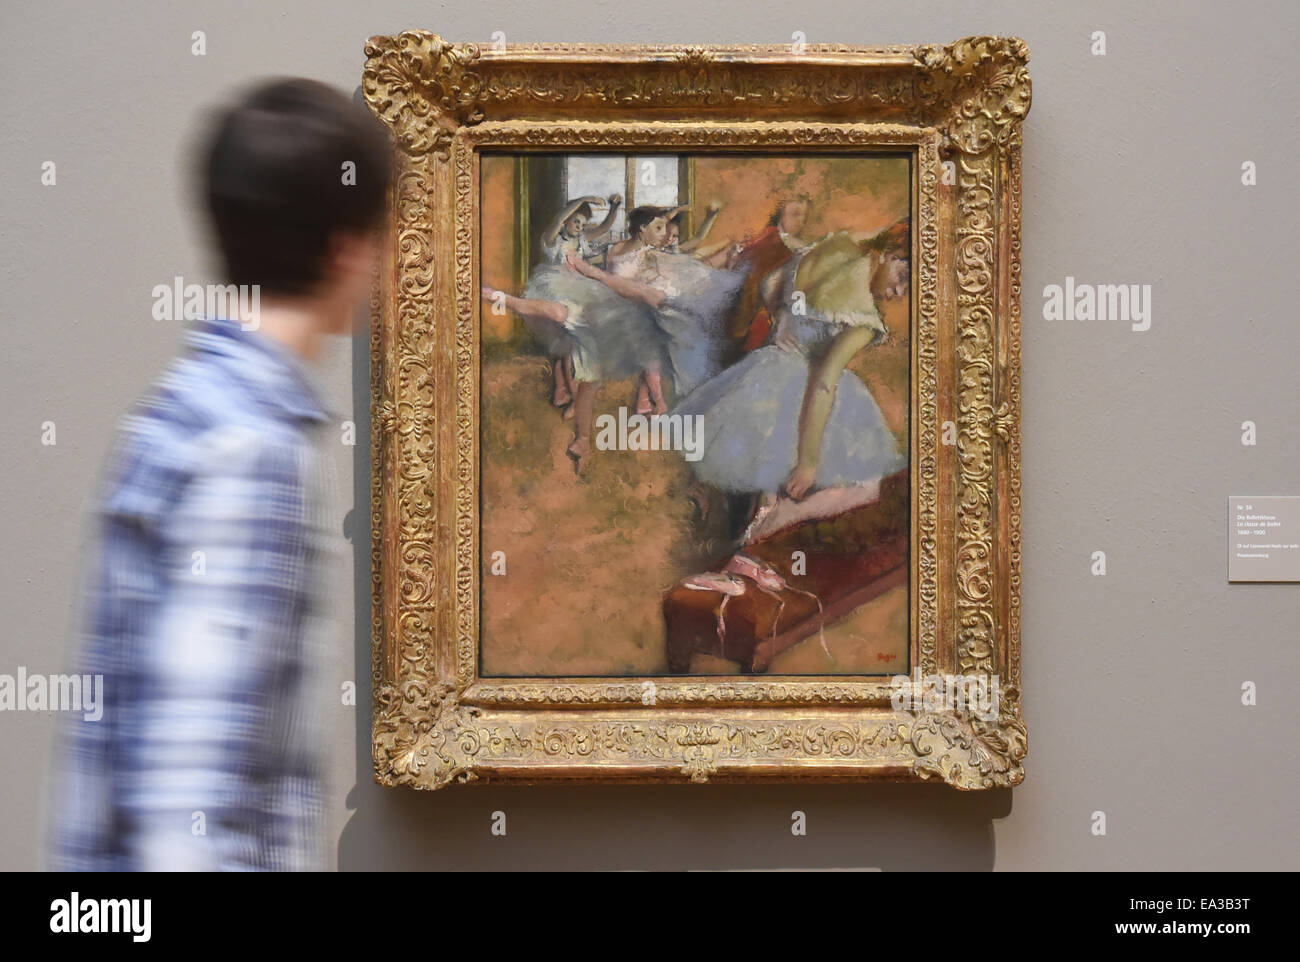 Karlsruhe, Germany. 06th Nov, 2014. A visitor looks at the work 'The Ballet Class' (1880-1900) by Edgar Degas in the exhibition 'Degas Classicism and Experimentation' at the Staatliche Kunsthalle in Karlsruhe, Germany, 06 November 2014. The exhibition runs from 08 November to 01 February 2015 in Karlsruhe. Photo: ULI DECK/dpa/Alamy Live News Stock Photo